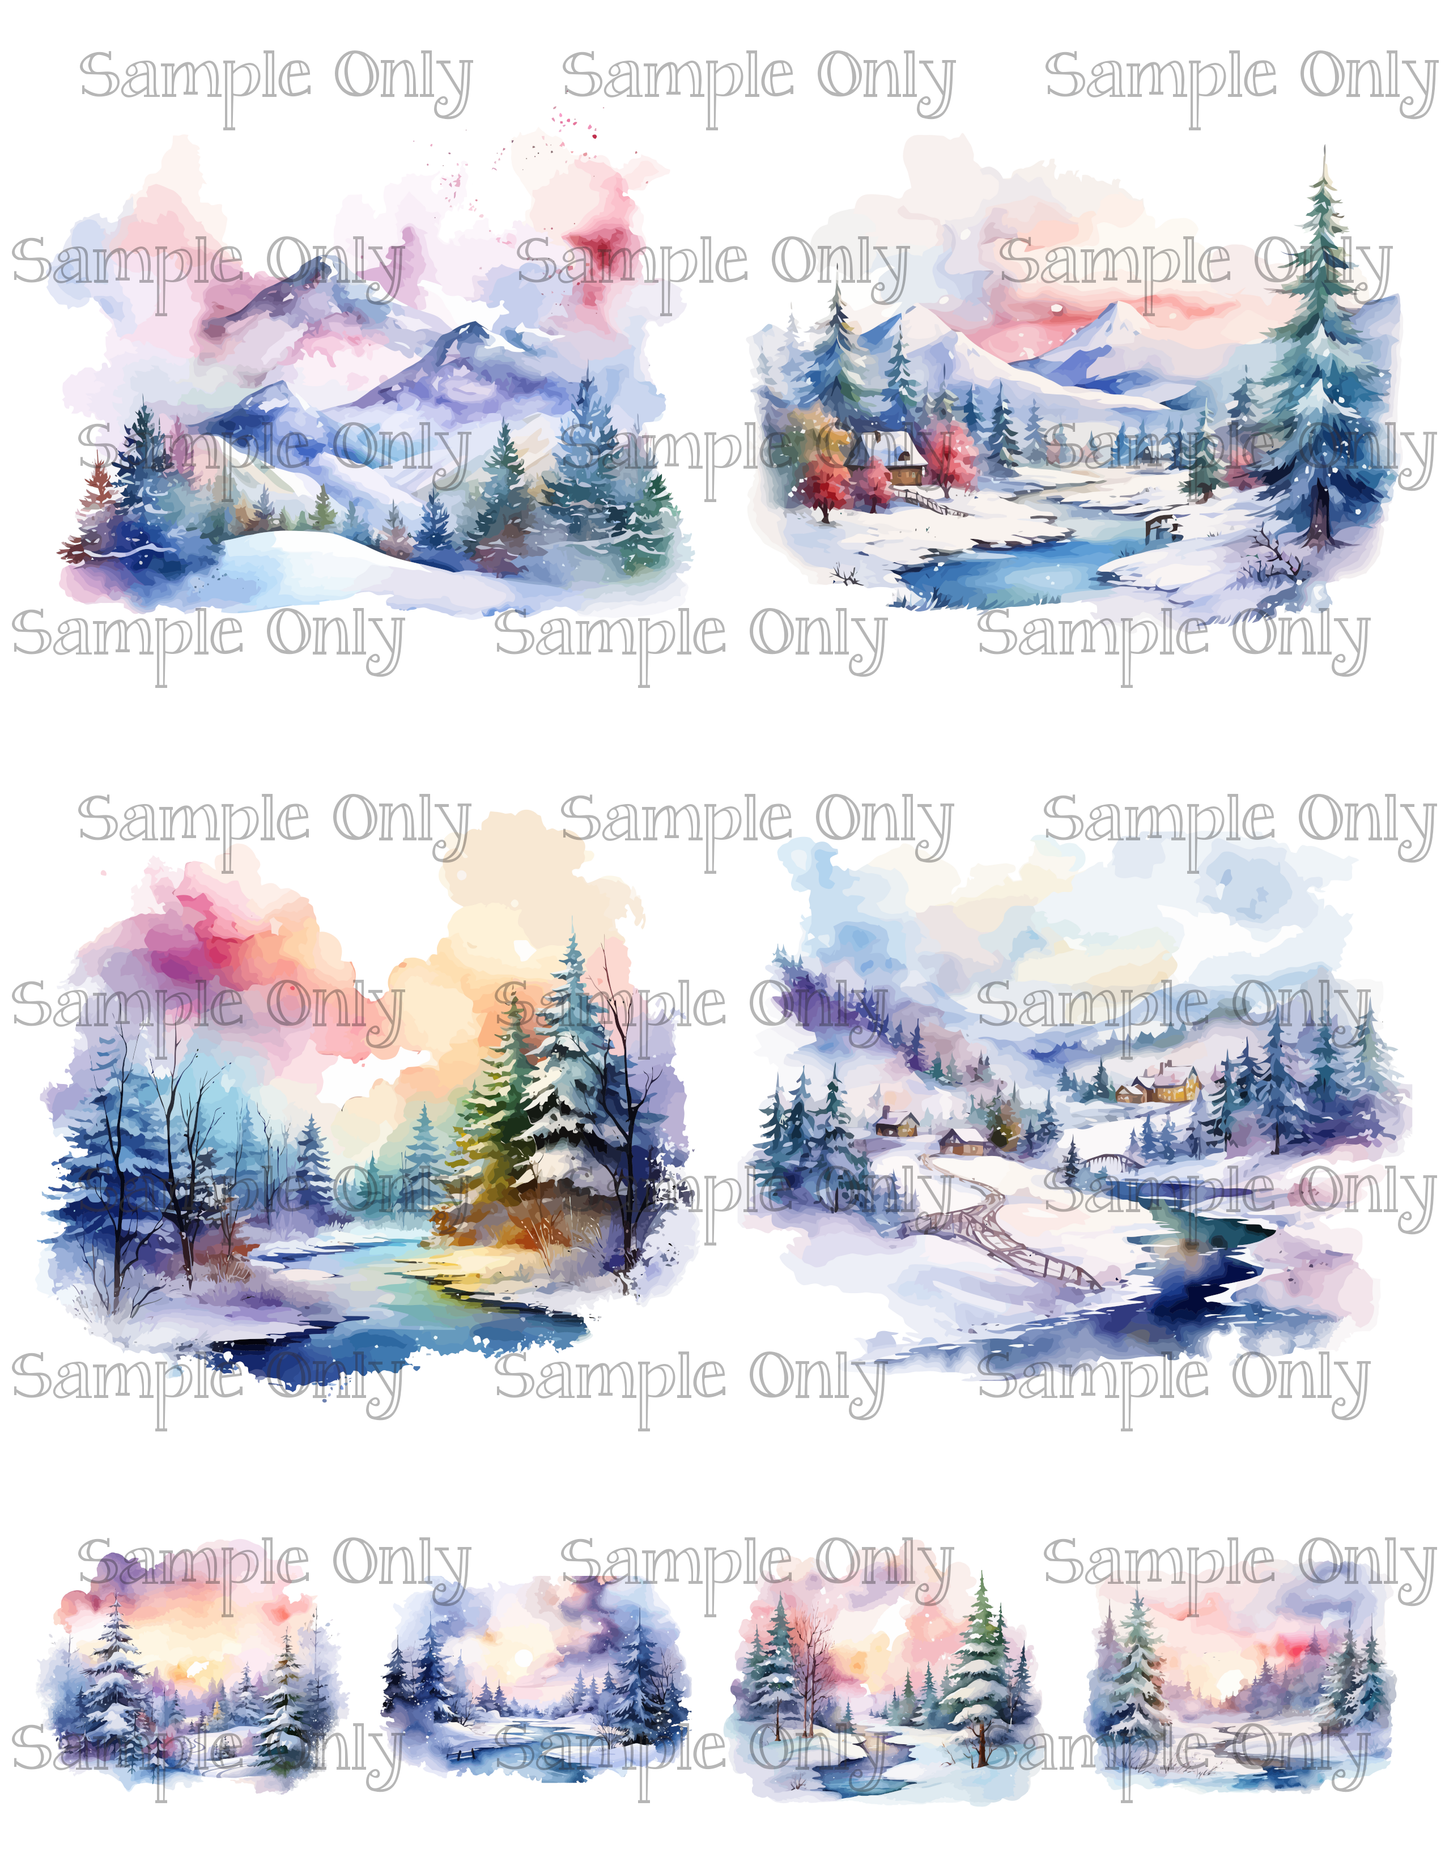 4 Inch Snowy Winter Landscape Set 05 Image Sheet For Polymer Clay Transfer Decal DIGITAL FILE OR PRINTED